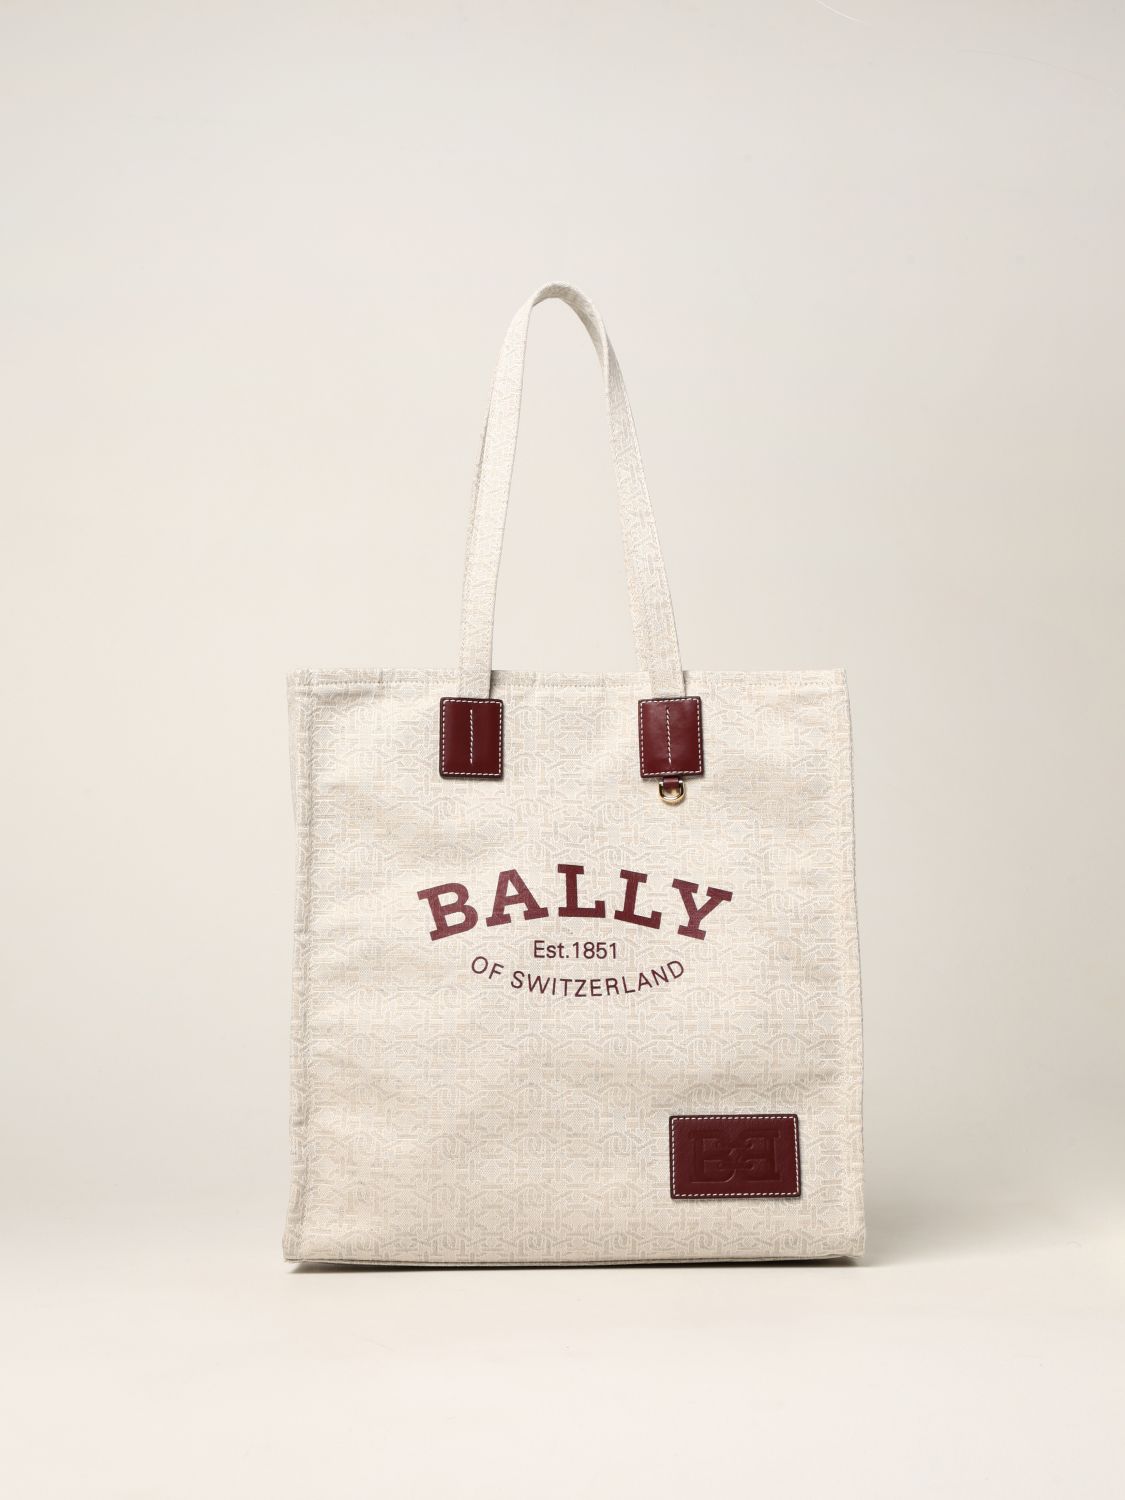 Bally Brown Monogram Coated Canvas and Leather Crystalia Tote